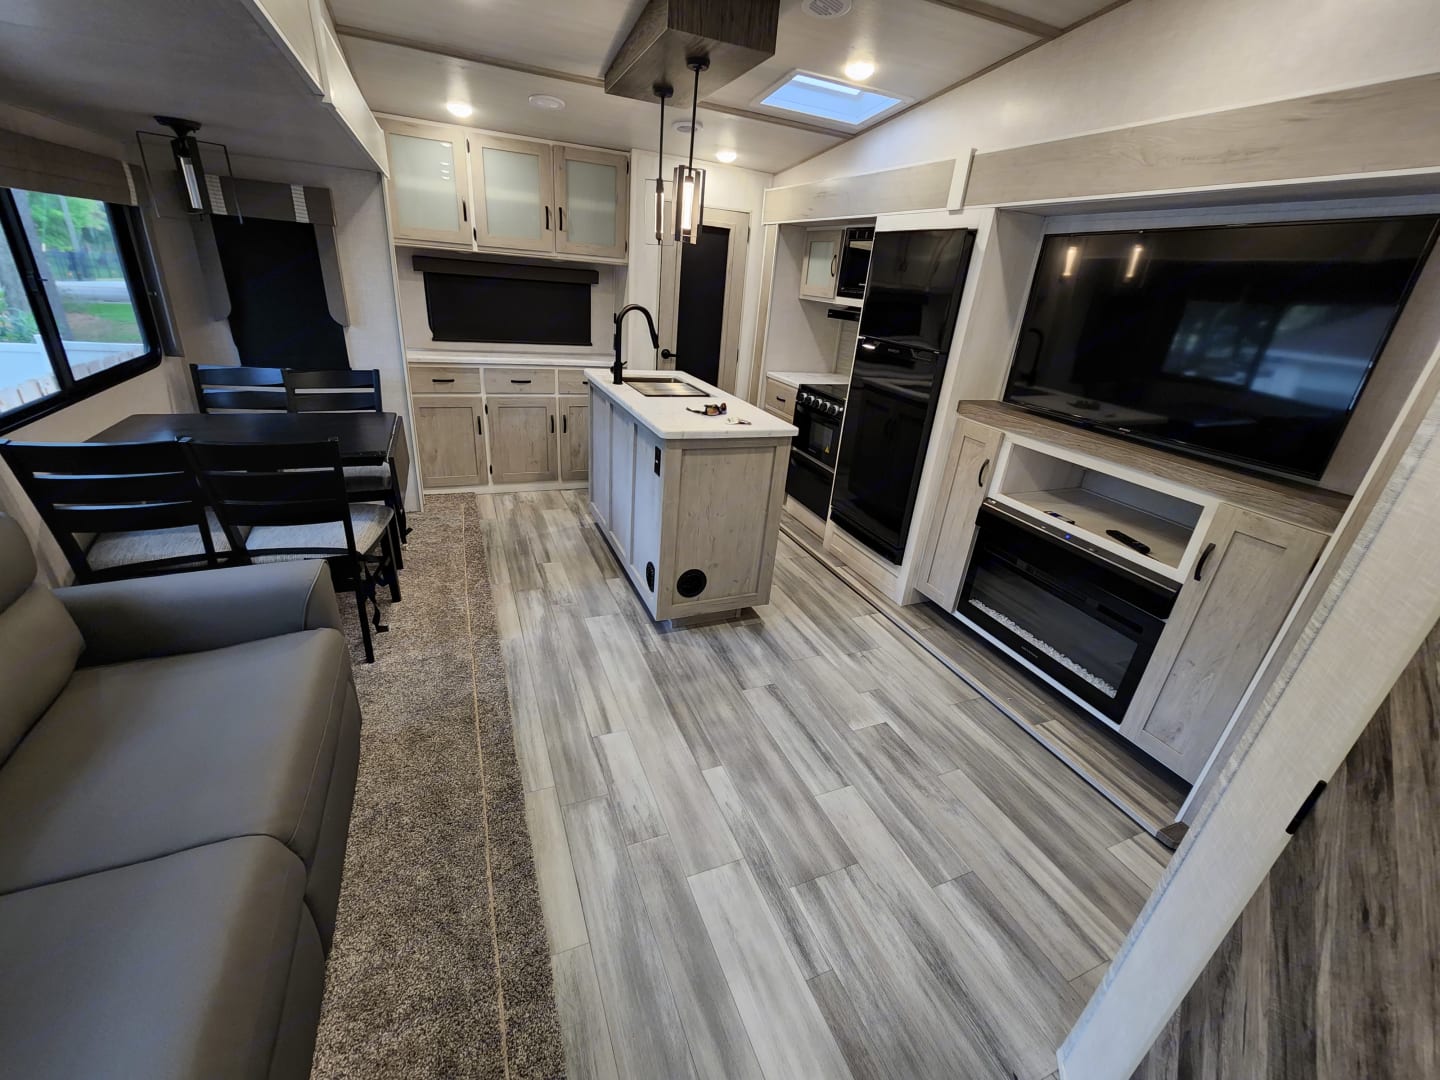 Fifth-wheel RV for rent in Florida